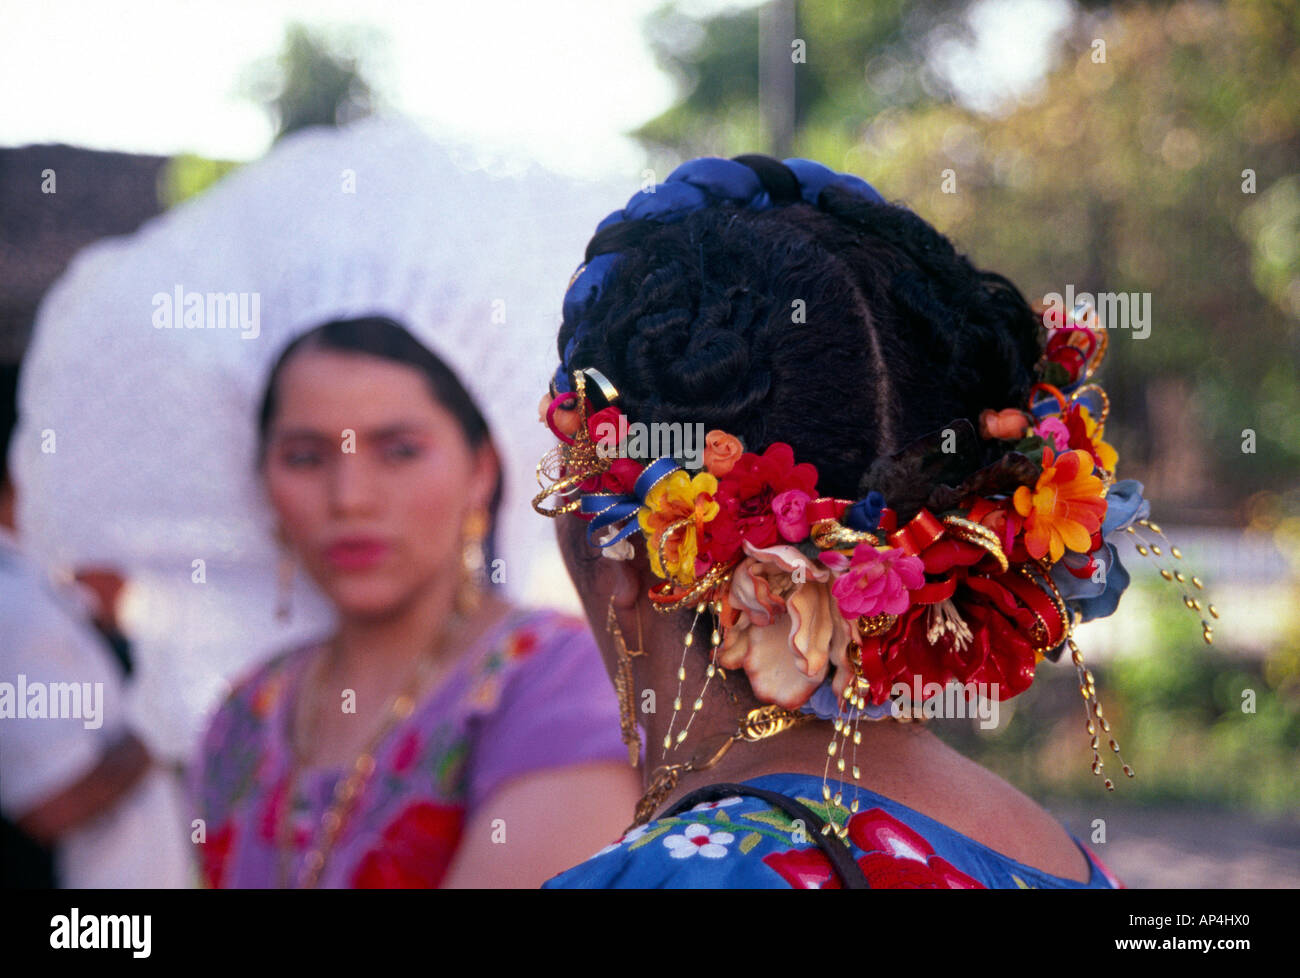 Mexico, Oaxaca, Juchitan. During the traditional velas in the Tehuantepec Isthmus the Juchitecas Stock Photo